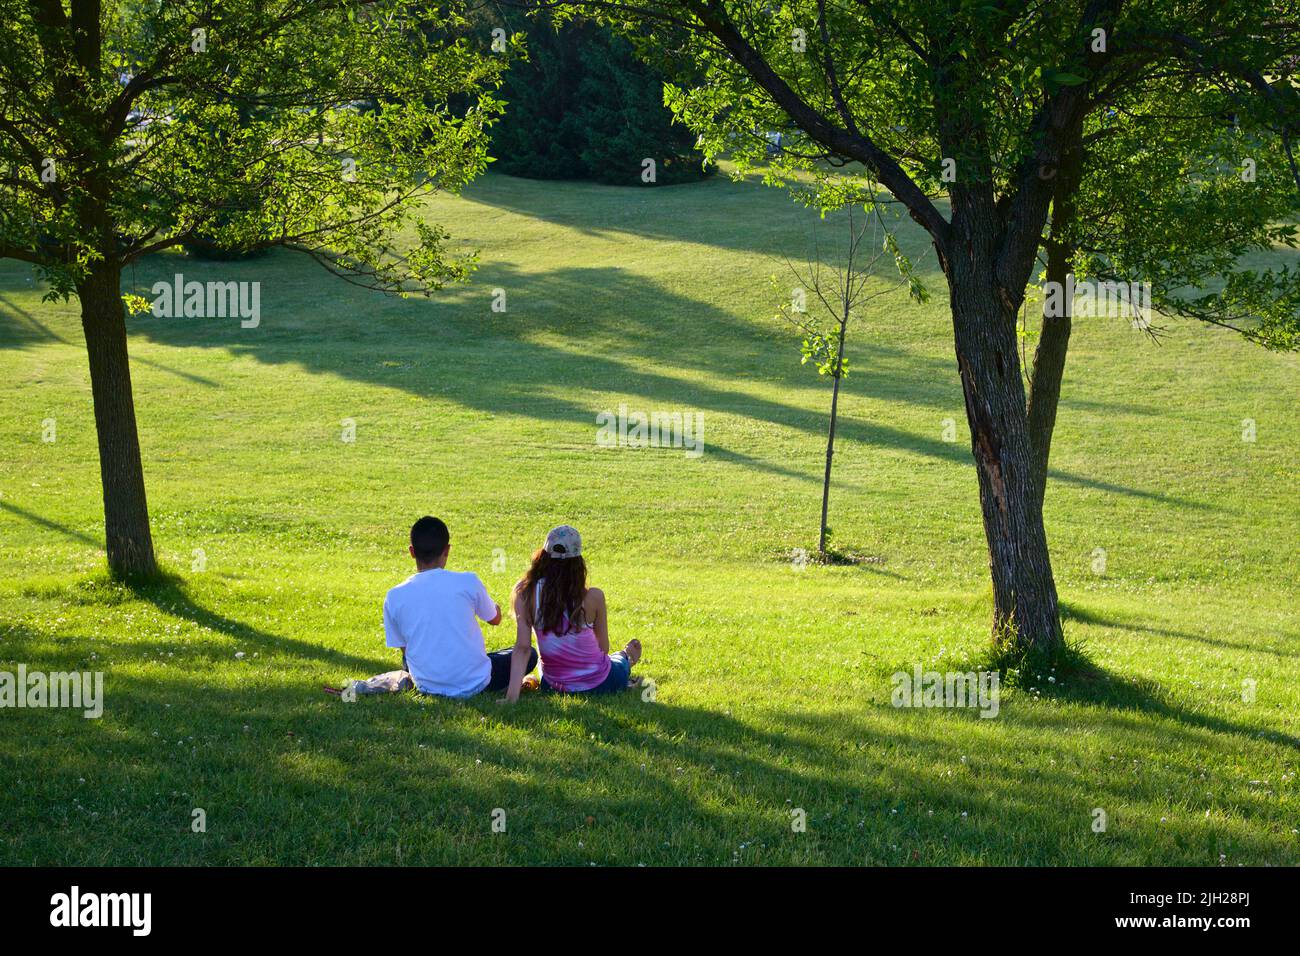 A healthy lifestyle - resting and enjoying in the public park Stock Photo